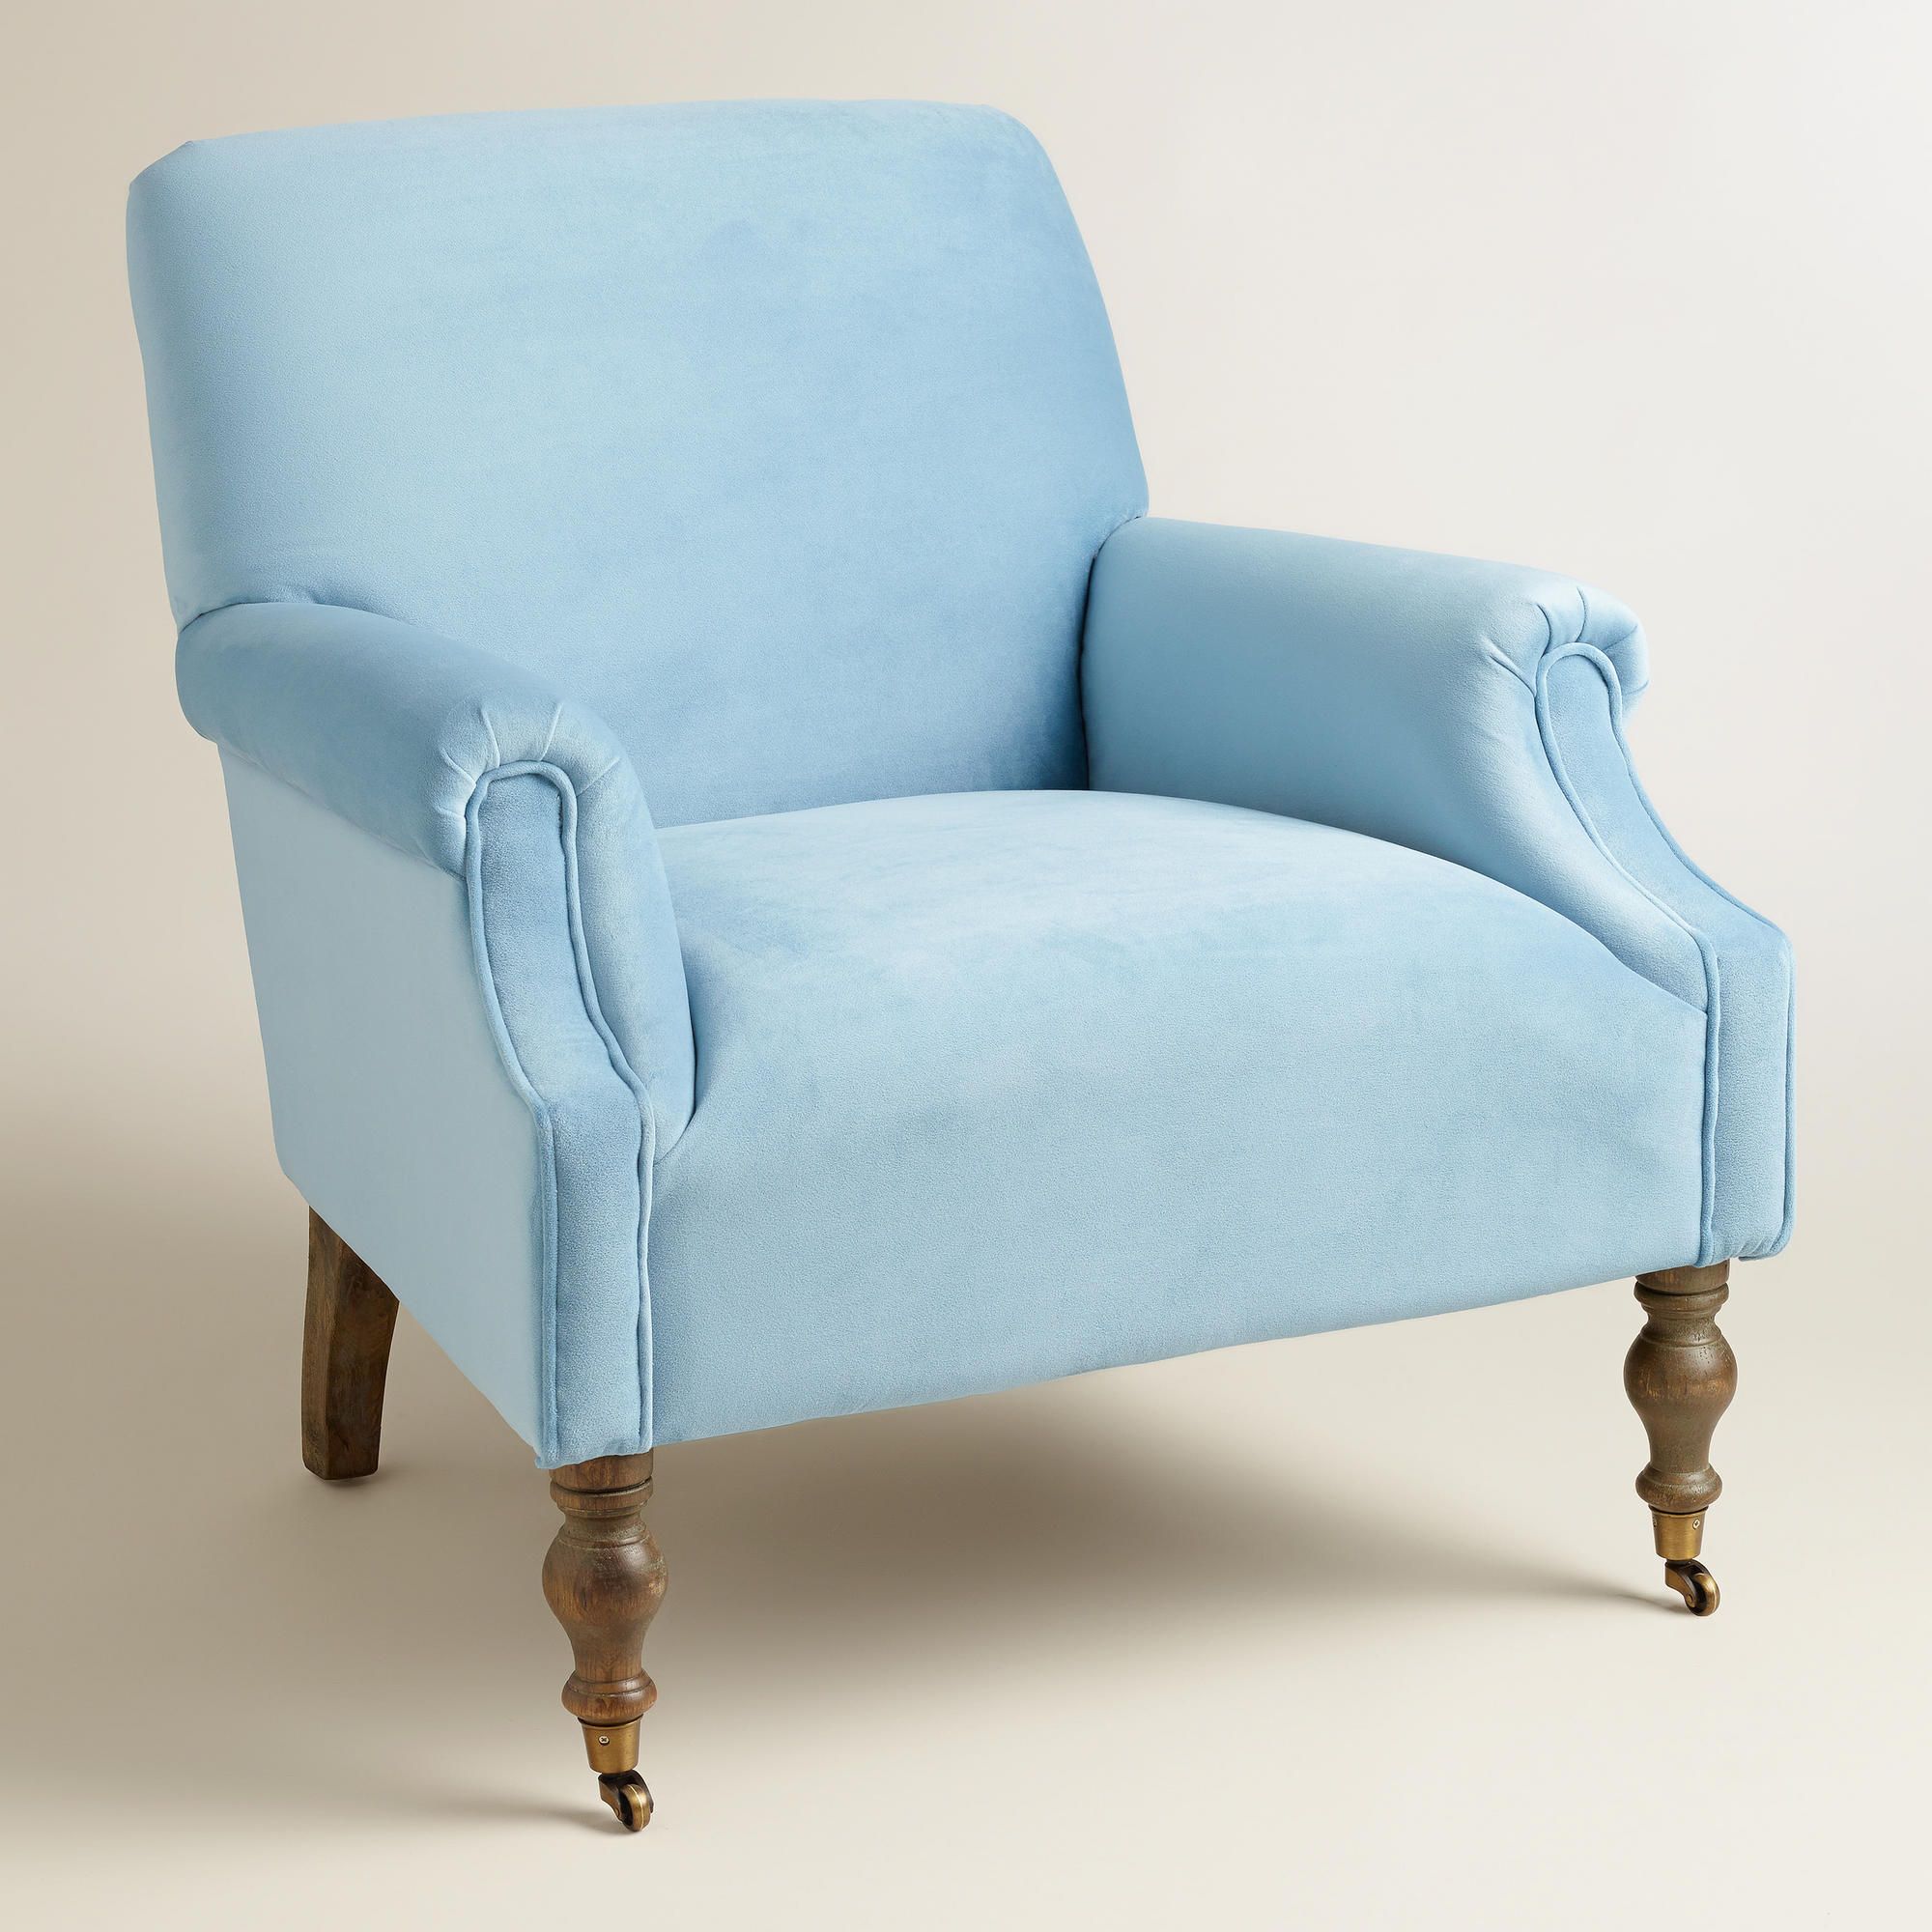 299 + 40 shipping ready to ship Icy Blue Mazie Chair | World Market ...